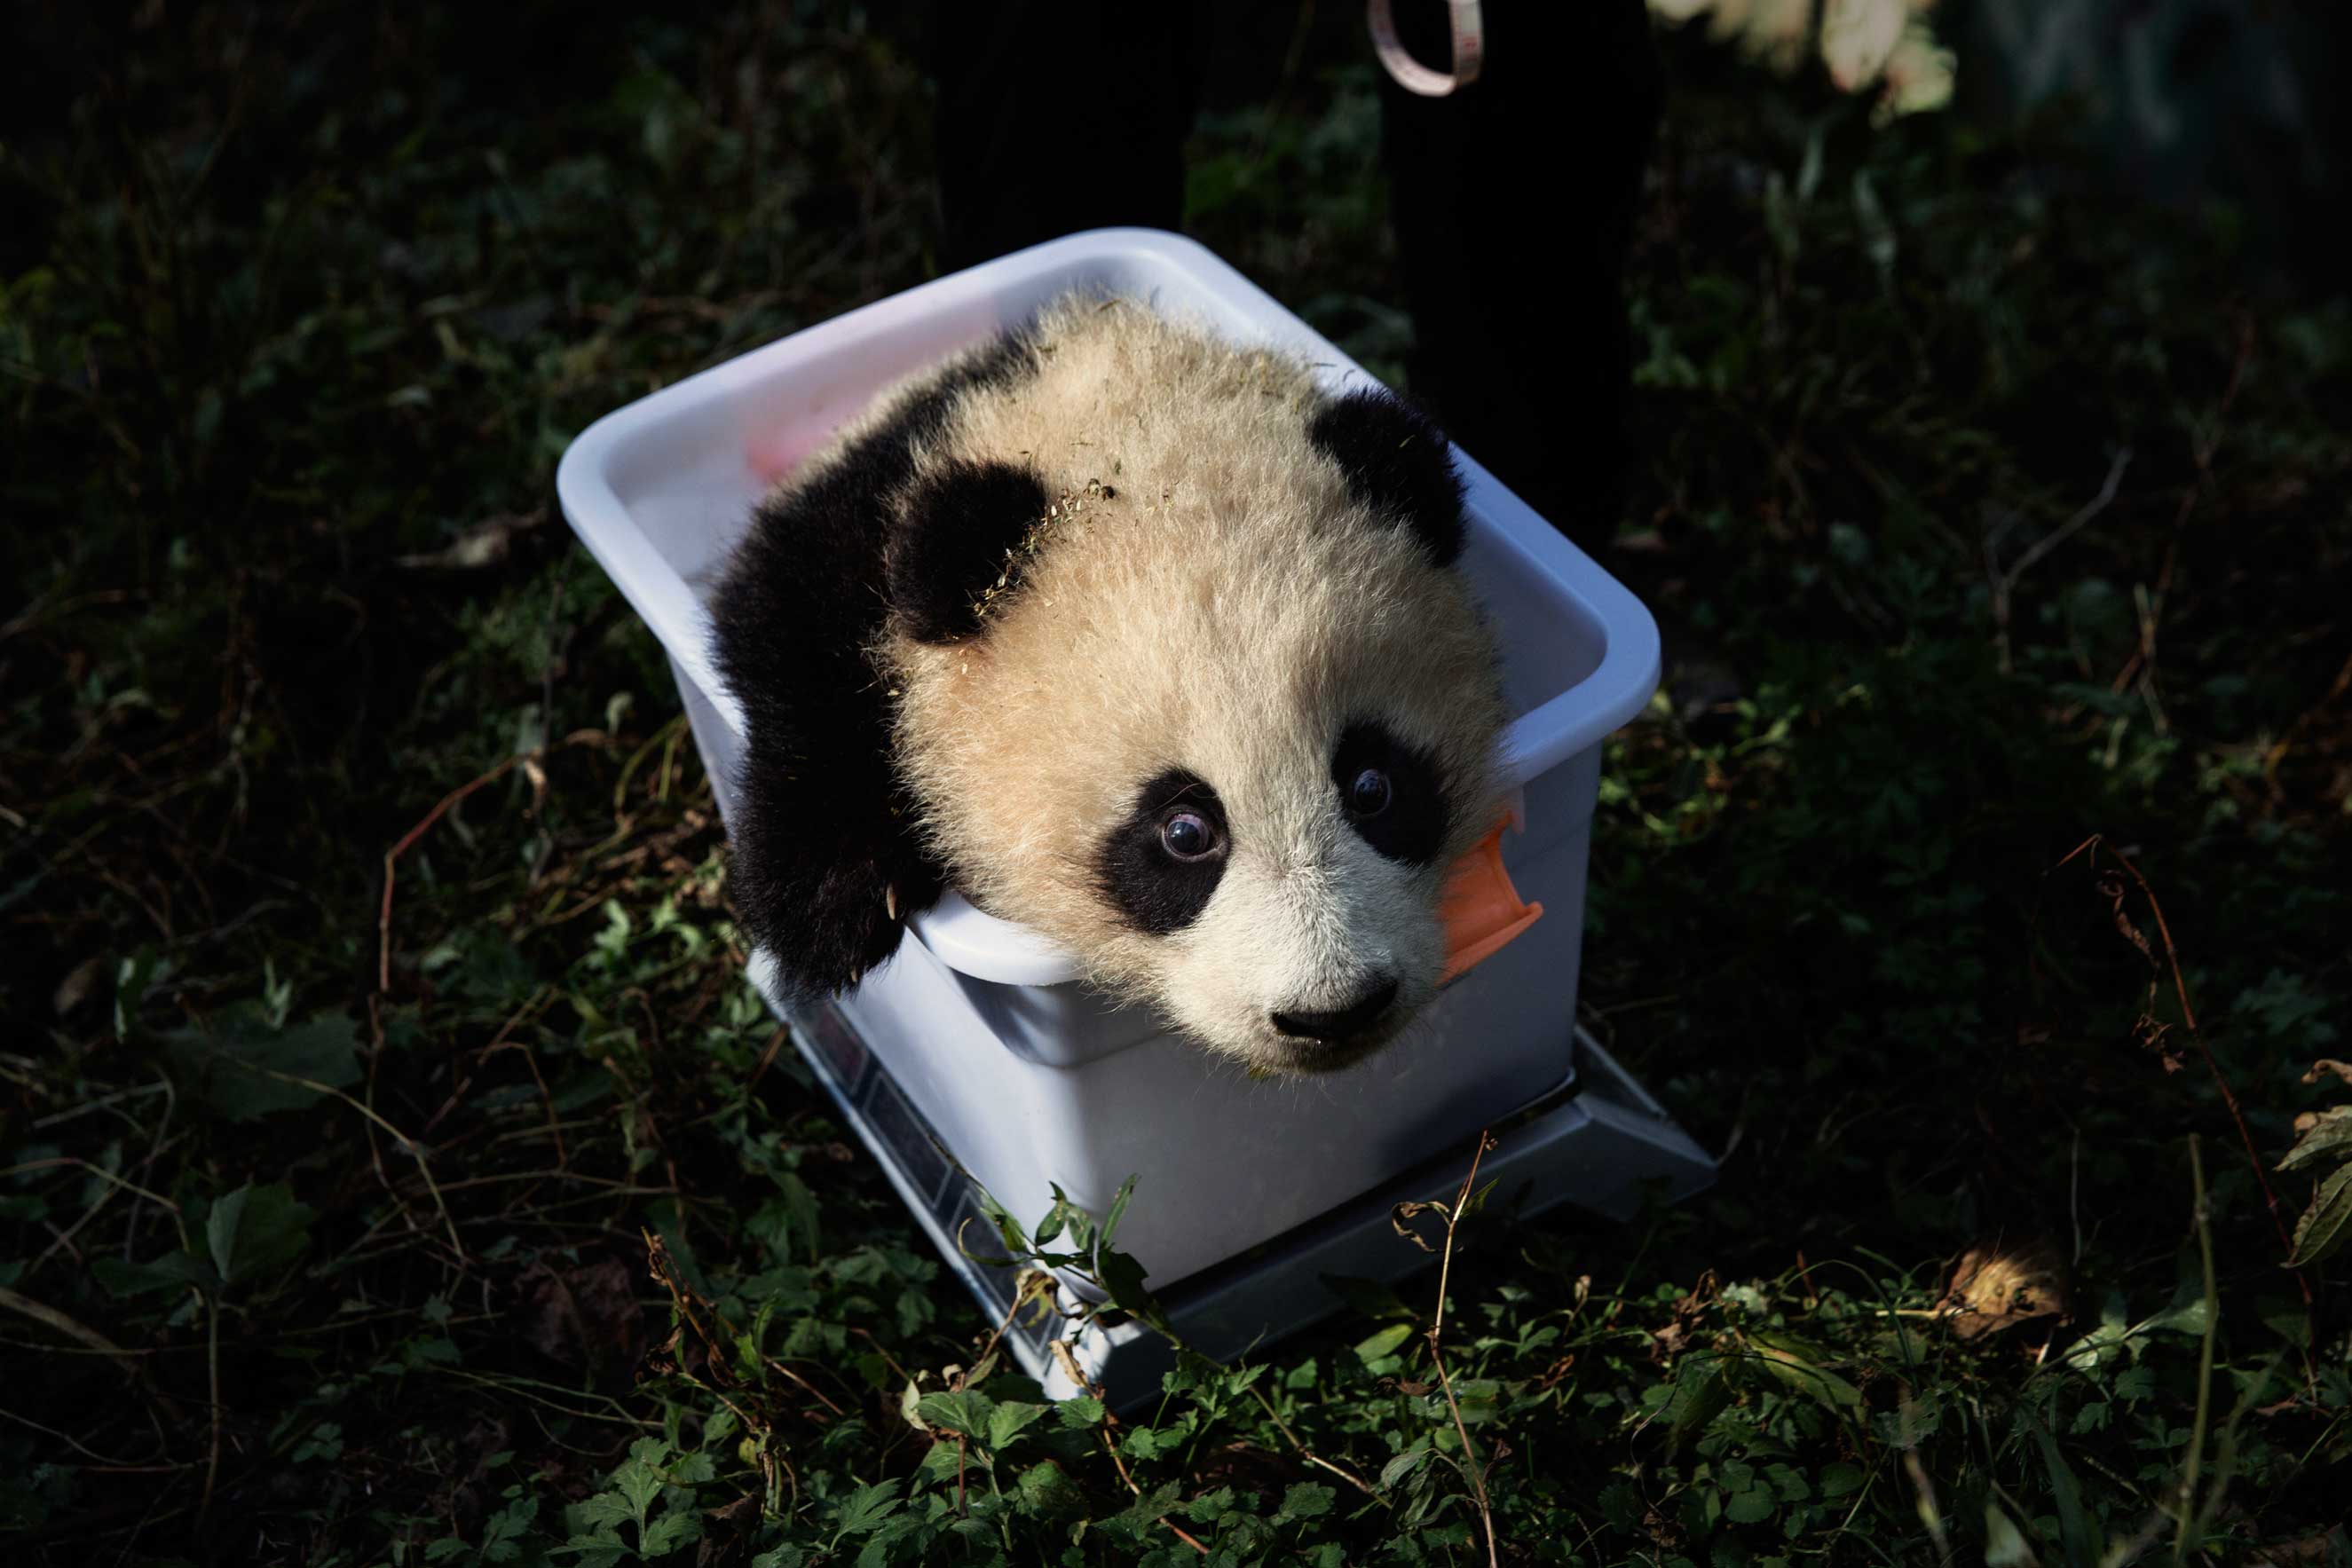 Learn Why The Pandas Are China's New Diplomats | Time